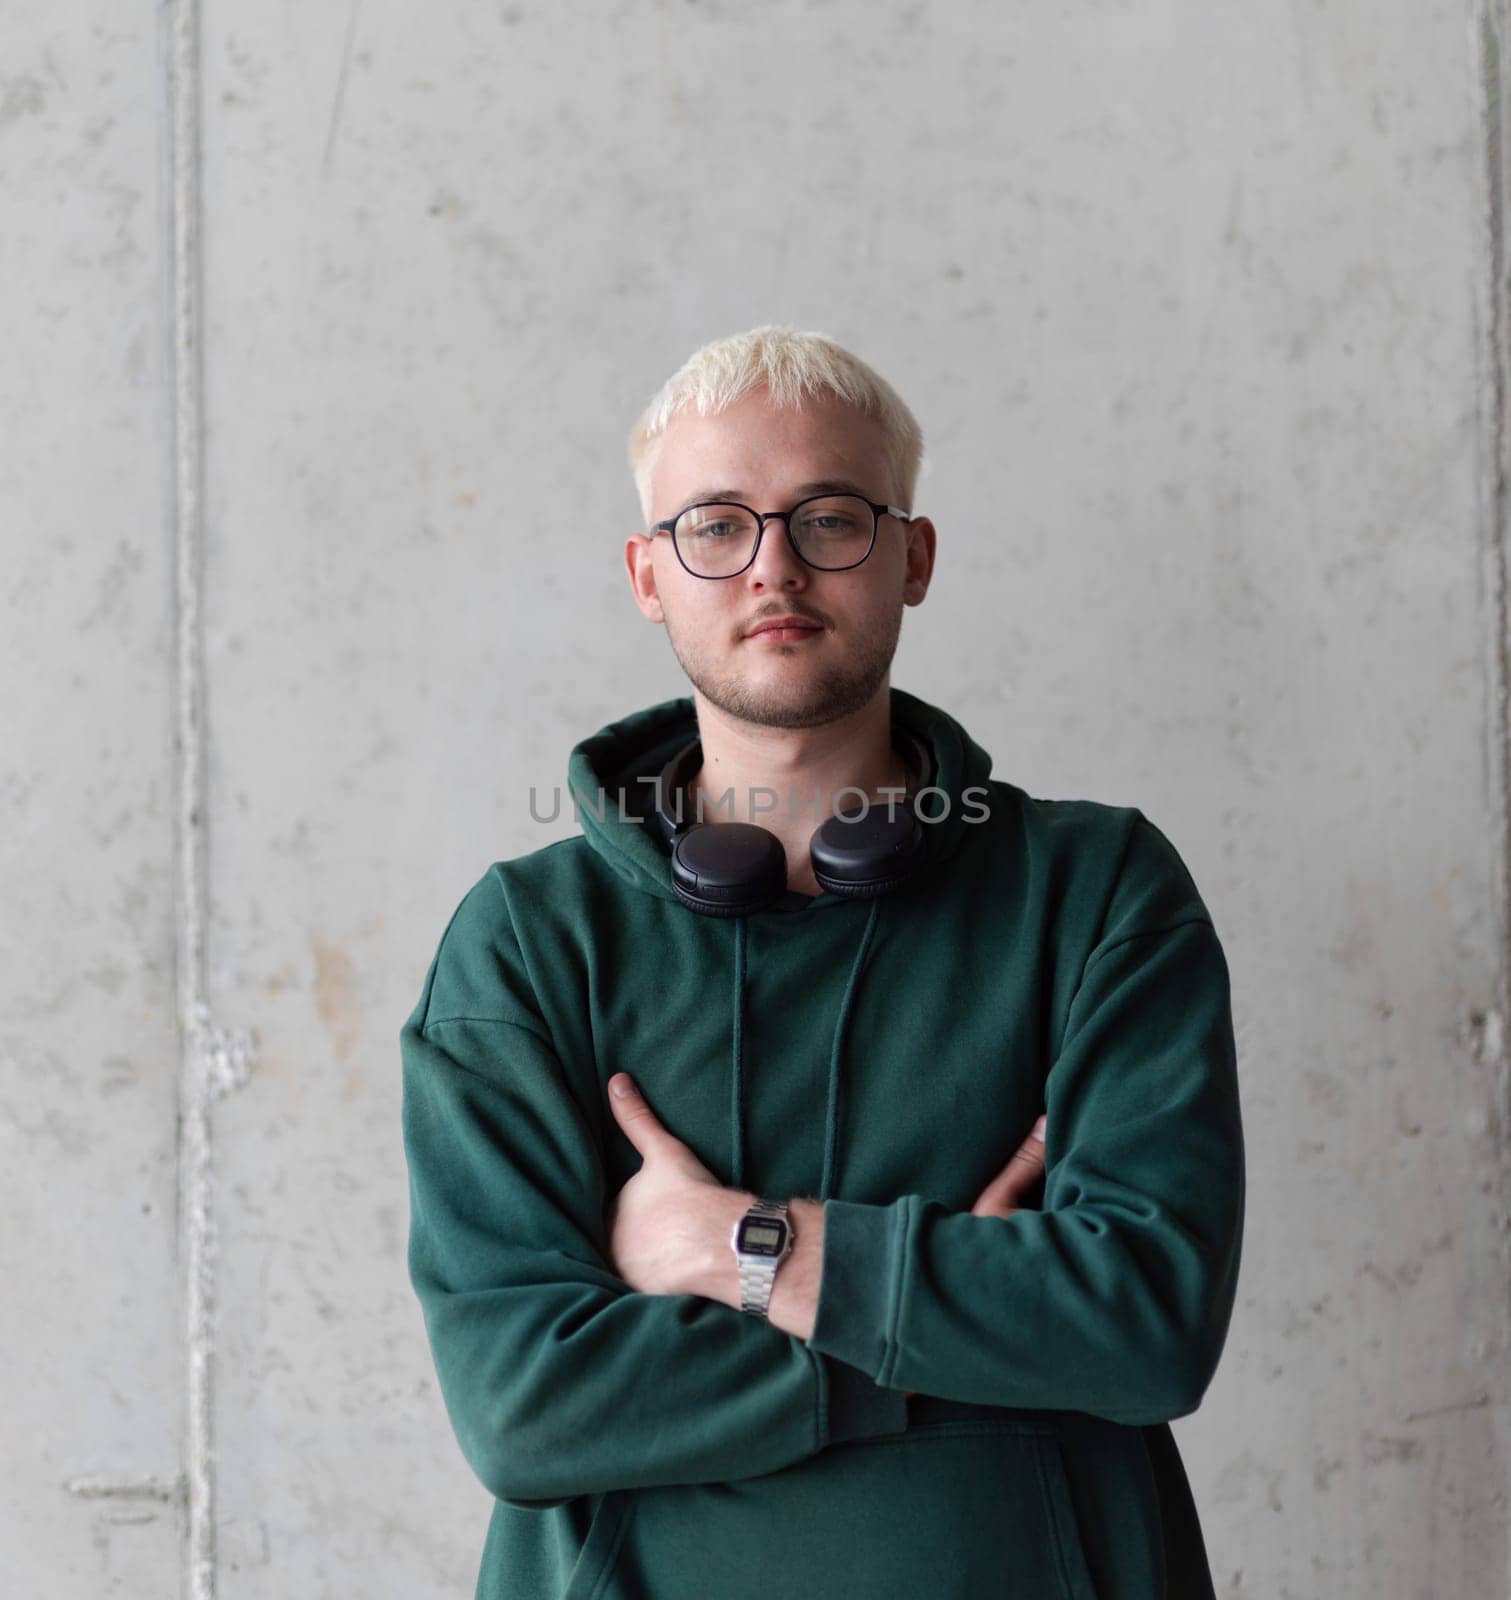 A man with blue hair, eyeglasses, and a green sweatshirt confidently poses with his arms crossed against a gray background, showcasing his fashionable and unique style. by dotshock